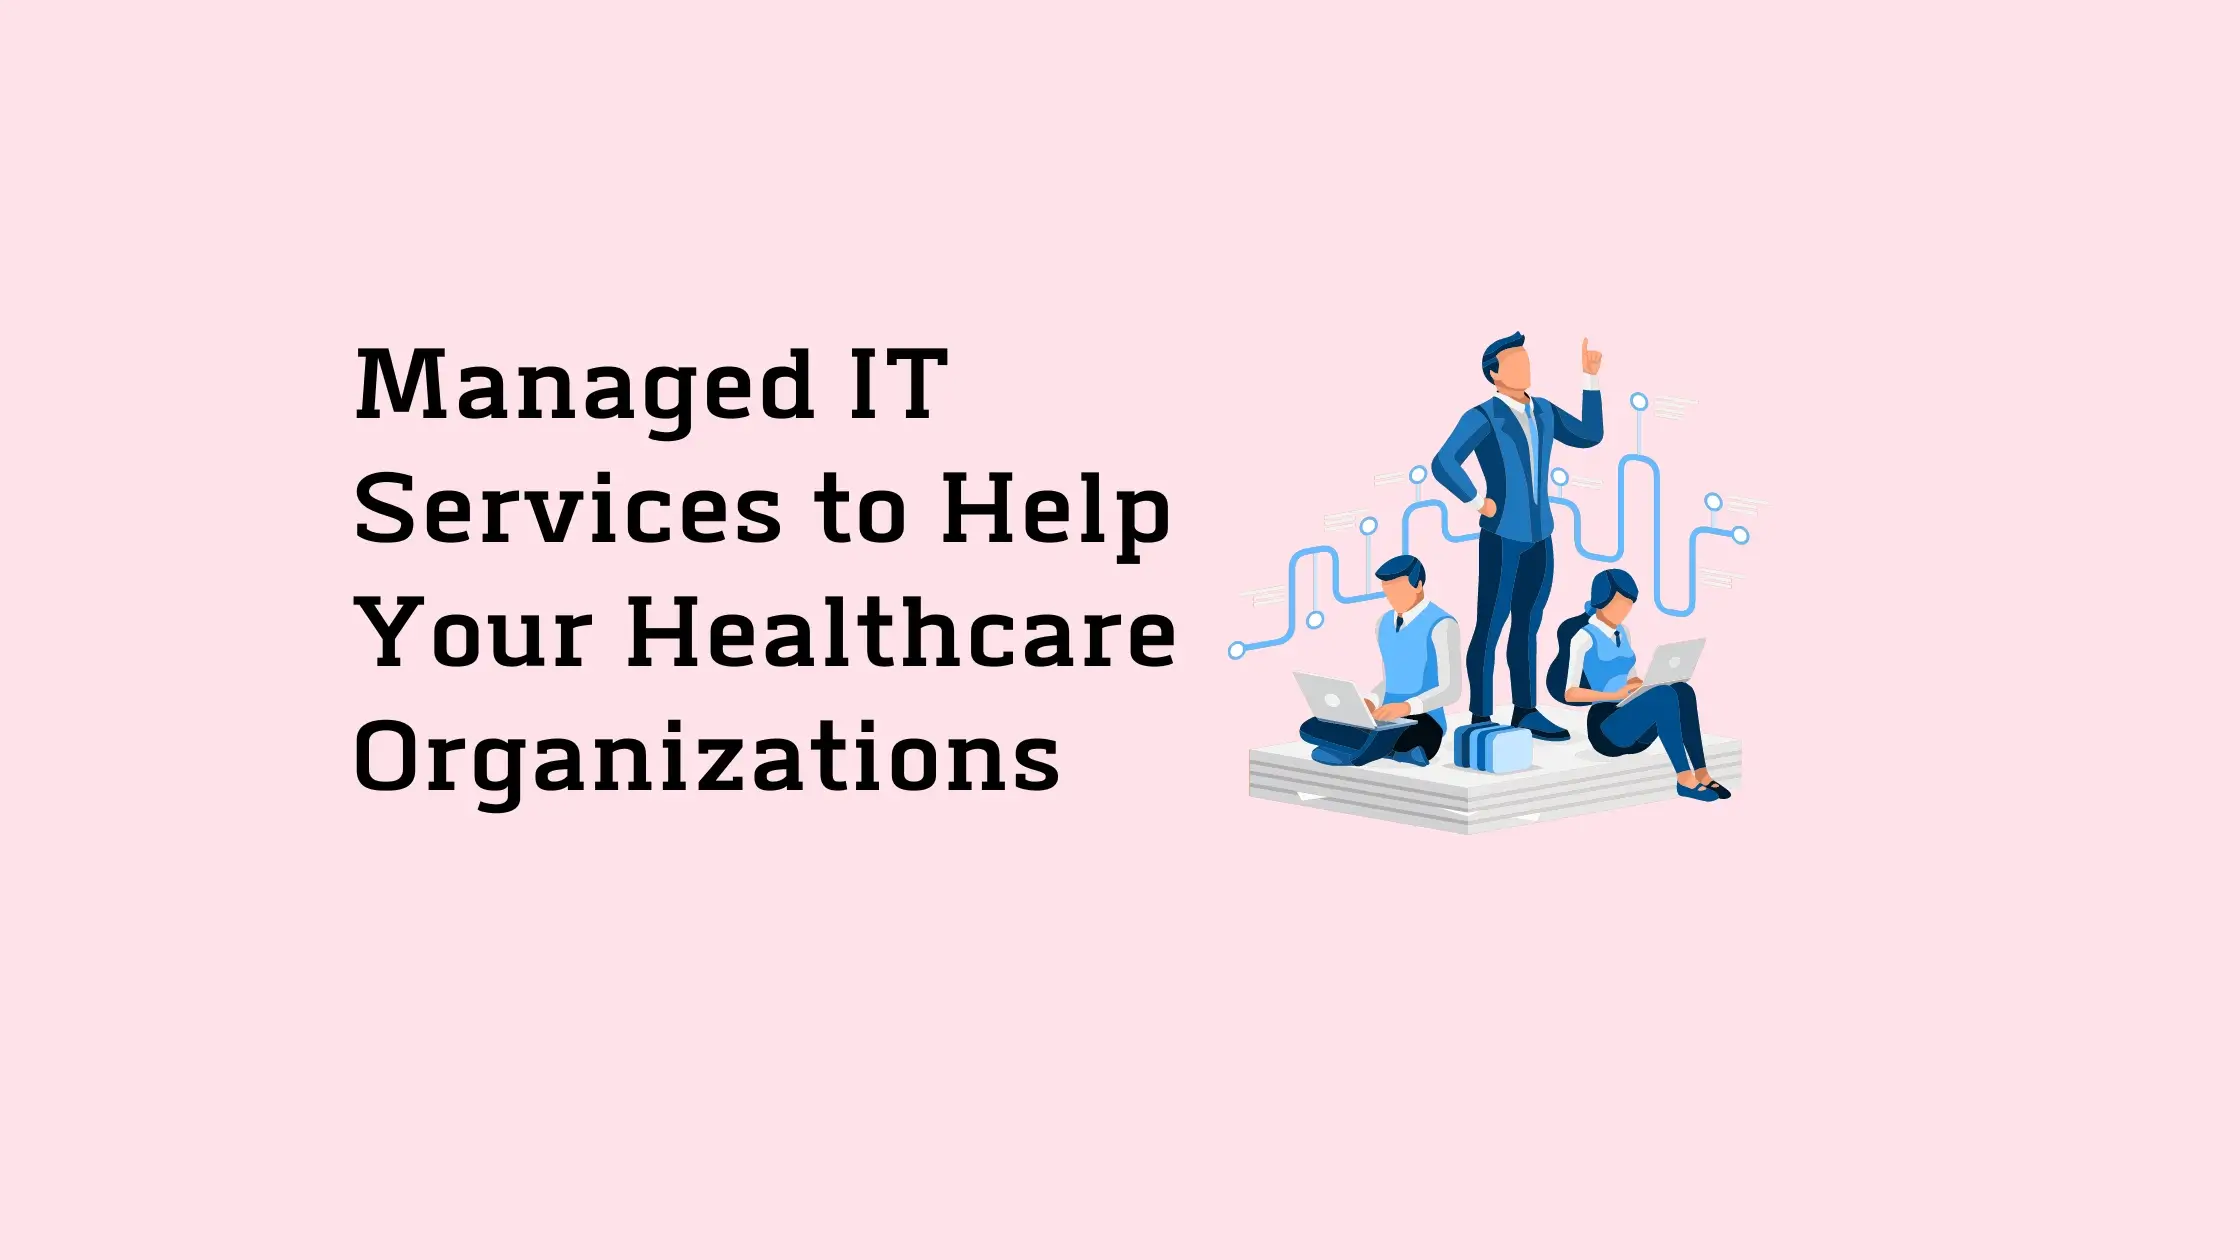 Managed IT Services to Help Your Healthcare Organizations